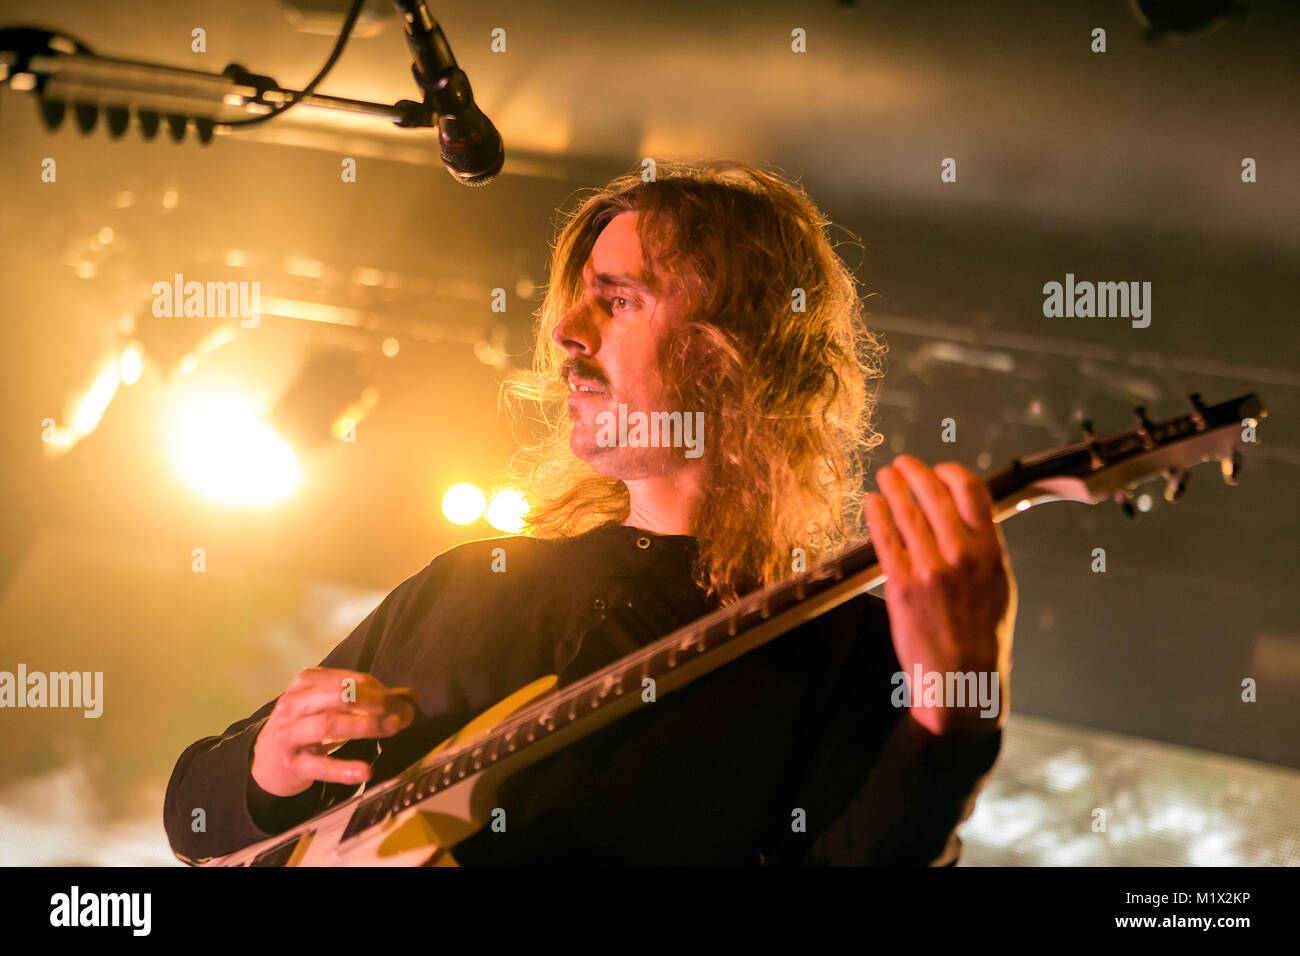 The progressive Swedish death metal band Opeth performs a live concert at USF Verftet in Bergen. Here vocalist and guitarist Mikael Åkerfeldt is pictured live on stage. Norway, 09/10 2015. Stock Photo